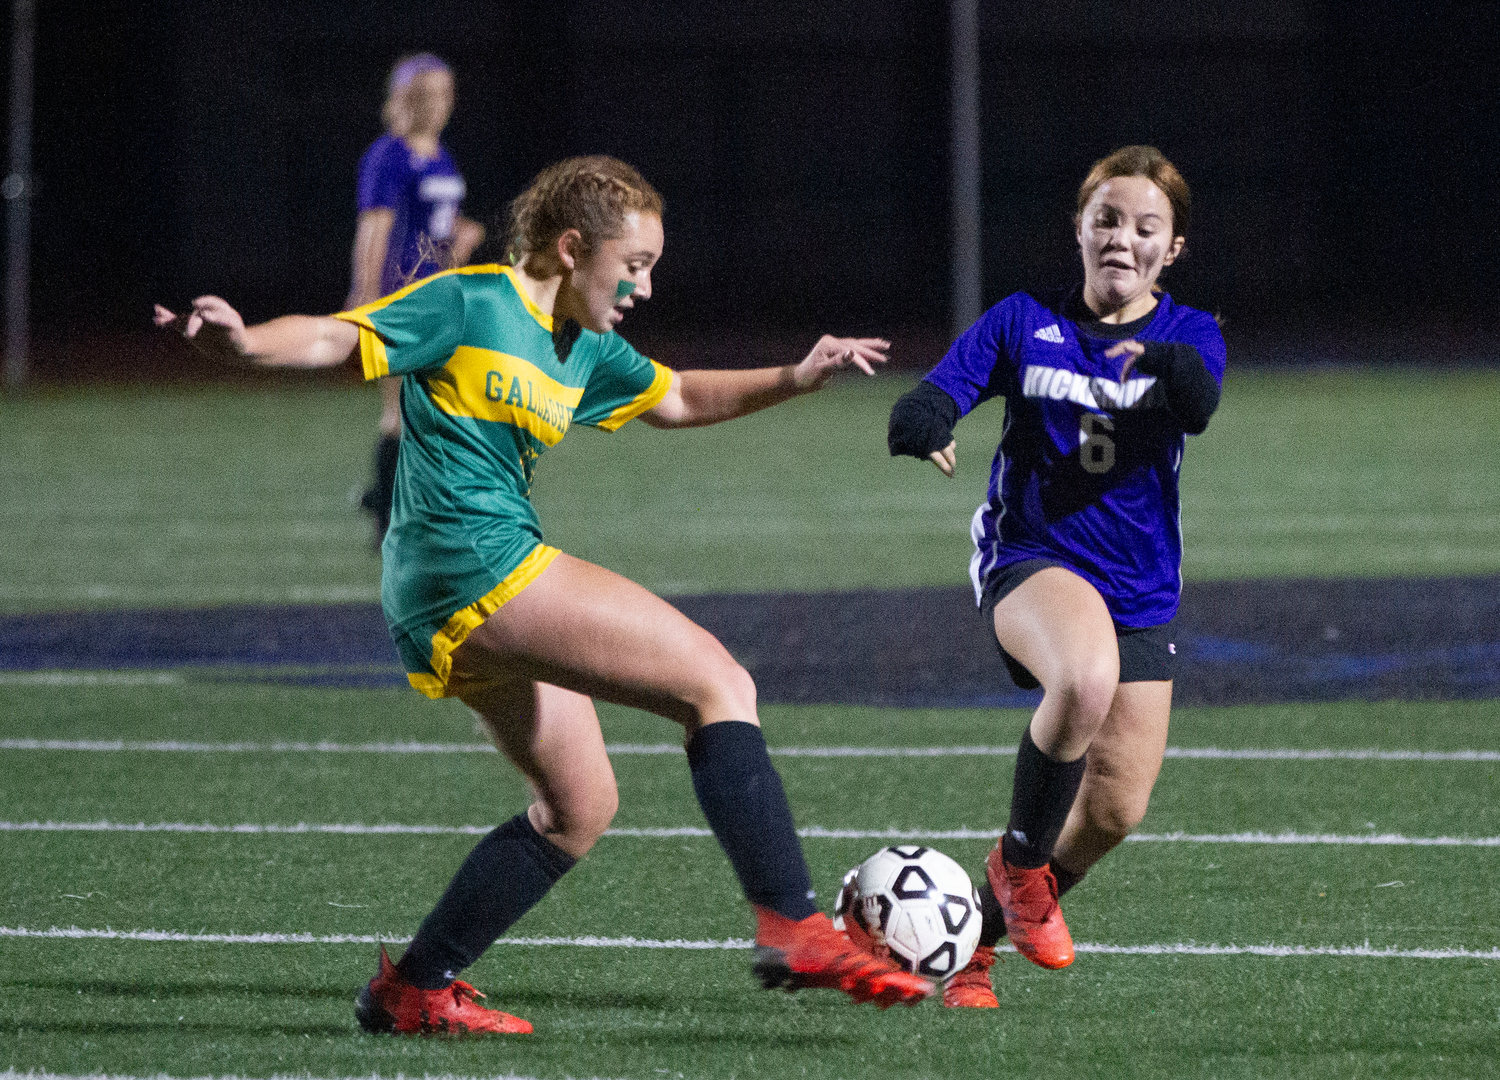 Angela Pirri dribbles the ball by a defender.